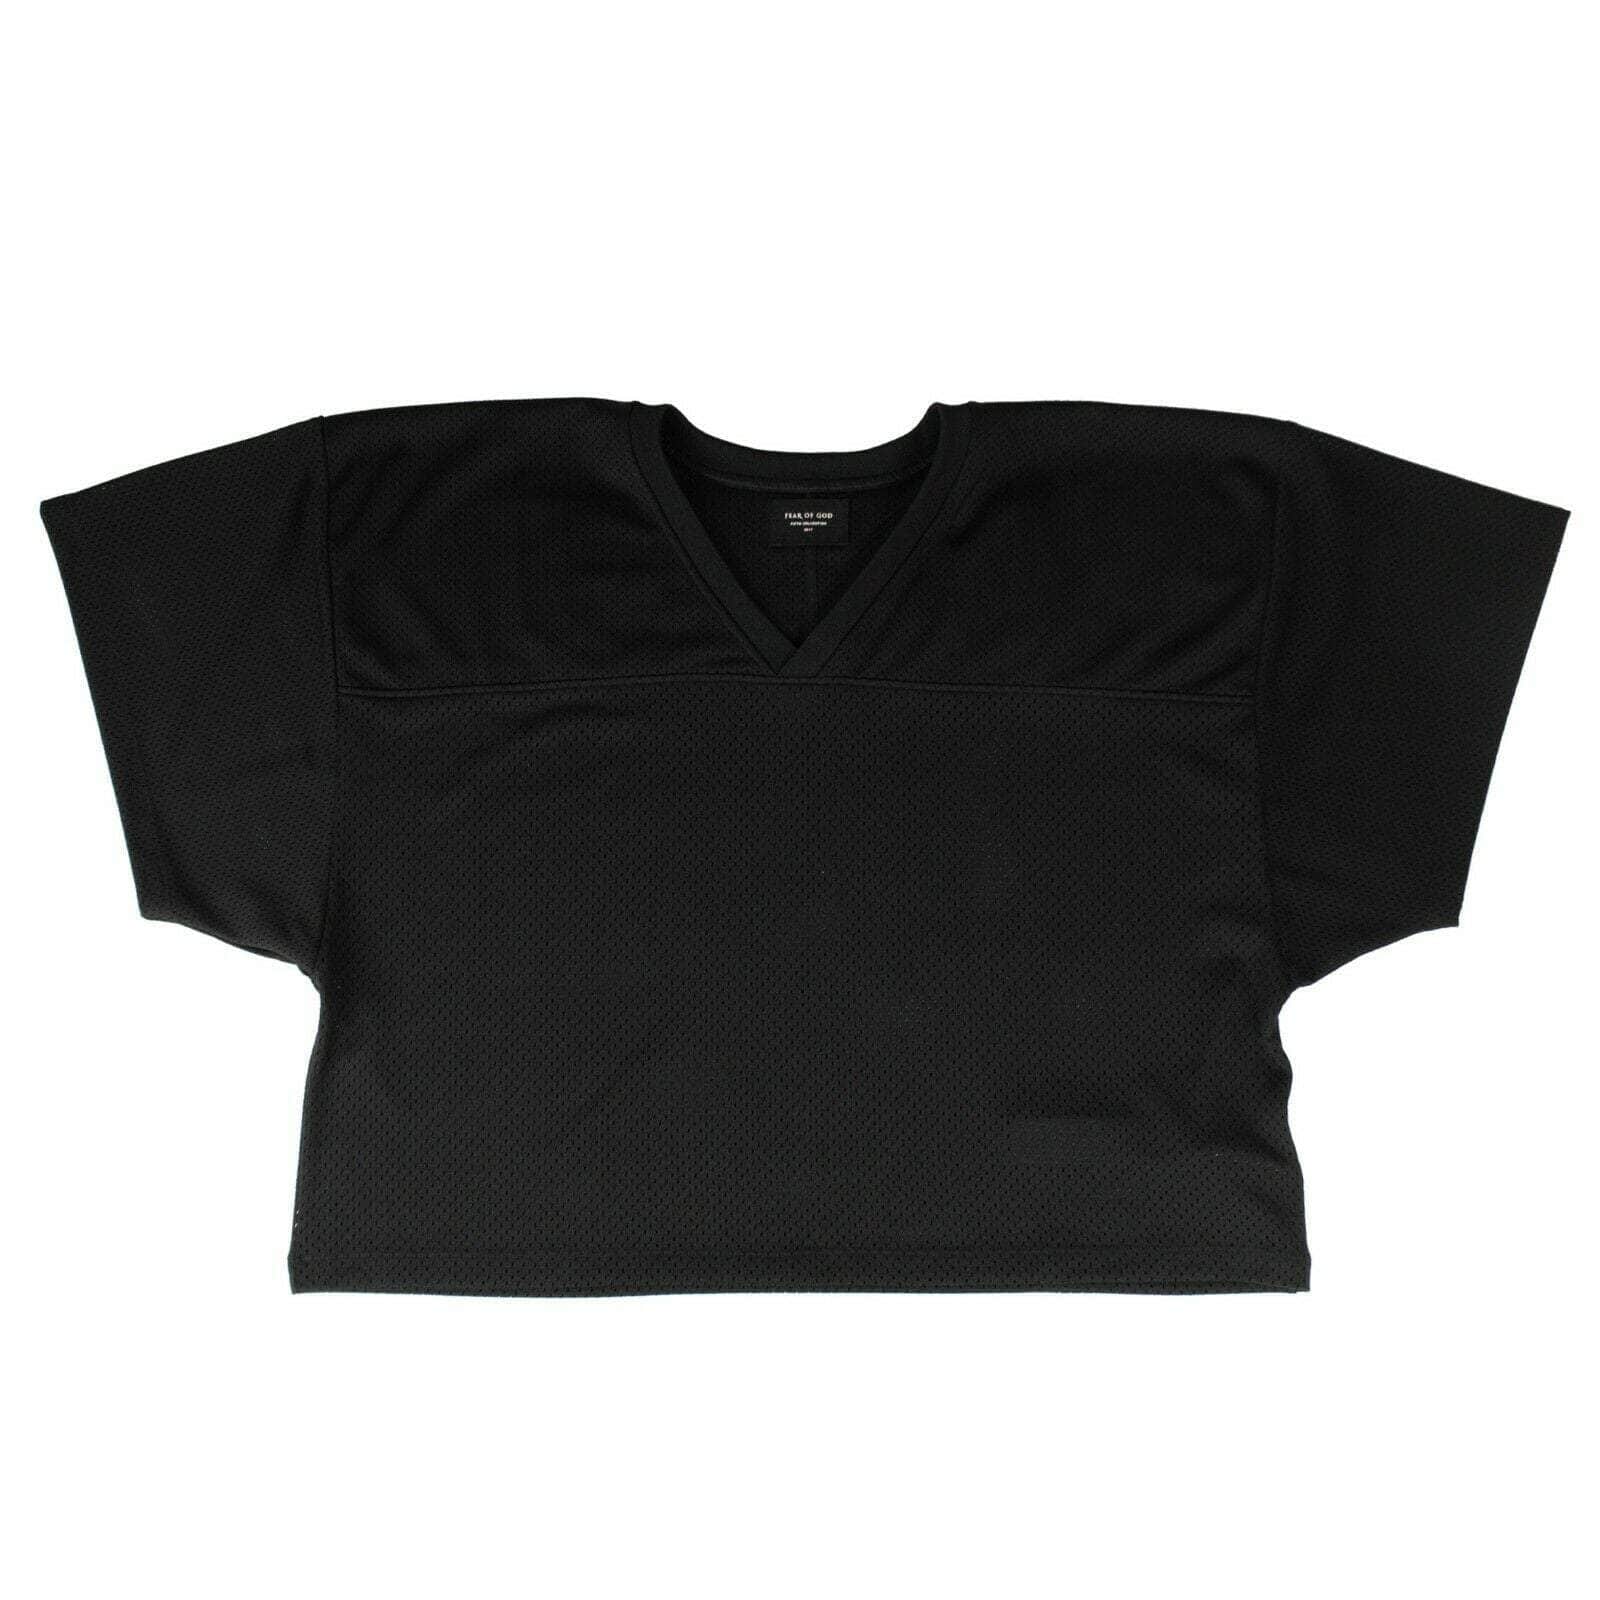 Fear Of God channelenable-all, chicmi, couponcollection, main-accessories, shop375, size-sm, Stadium Goods, uncategorized, under-250 SM Black Mesh Short Sleeve Football Jersey 65LE-1006/SM 65LE-1006/SM